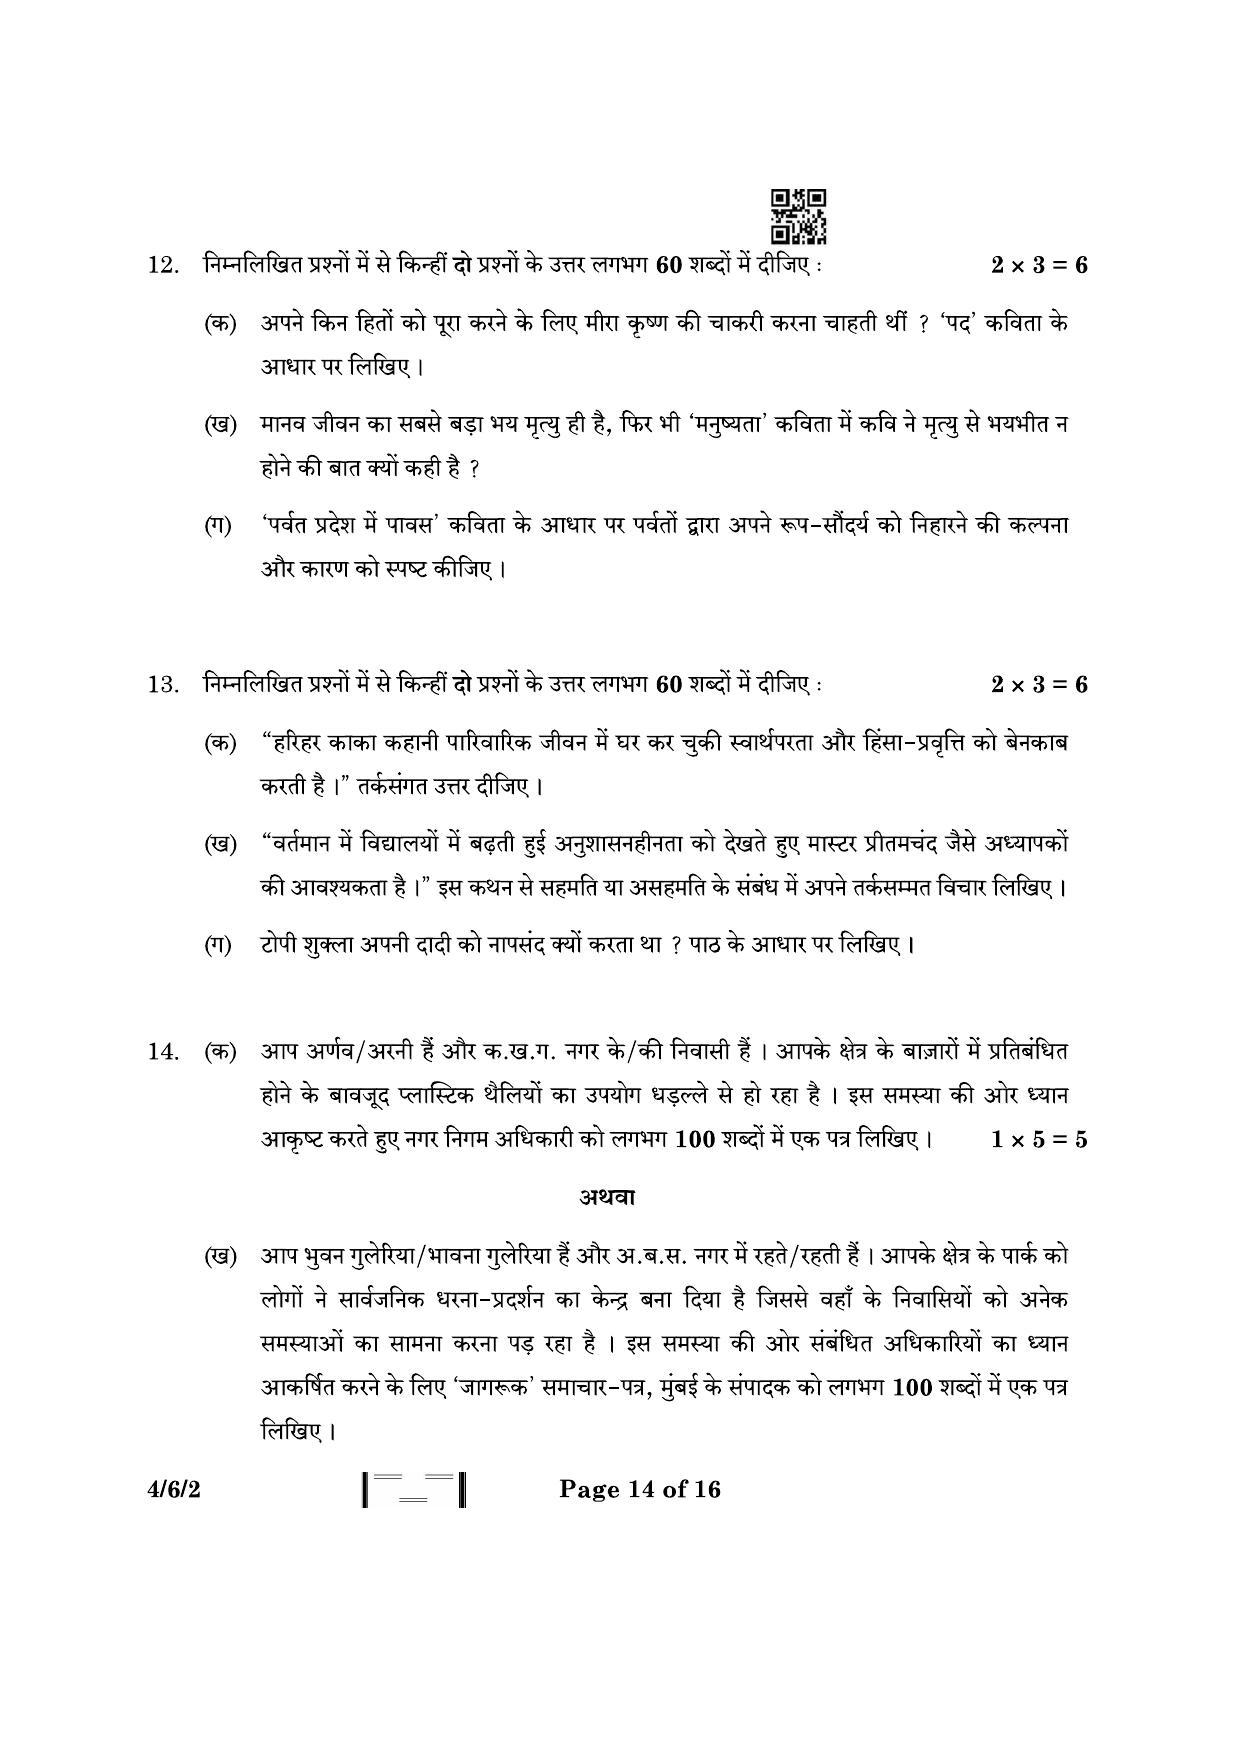 CBSE Class 10 4-6-2 Hindi B 2023 Question Paper - Page 14